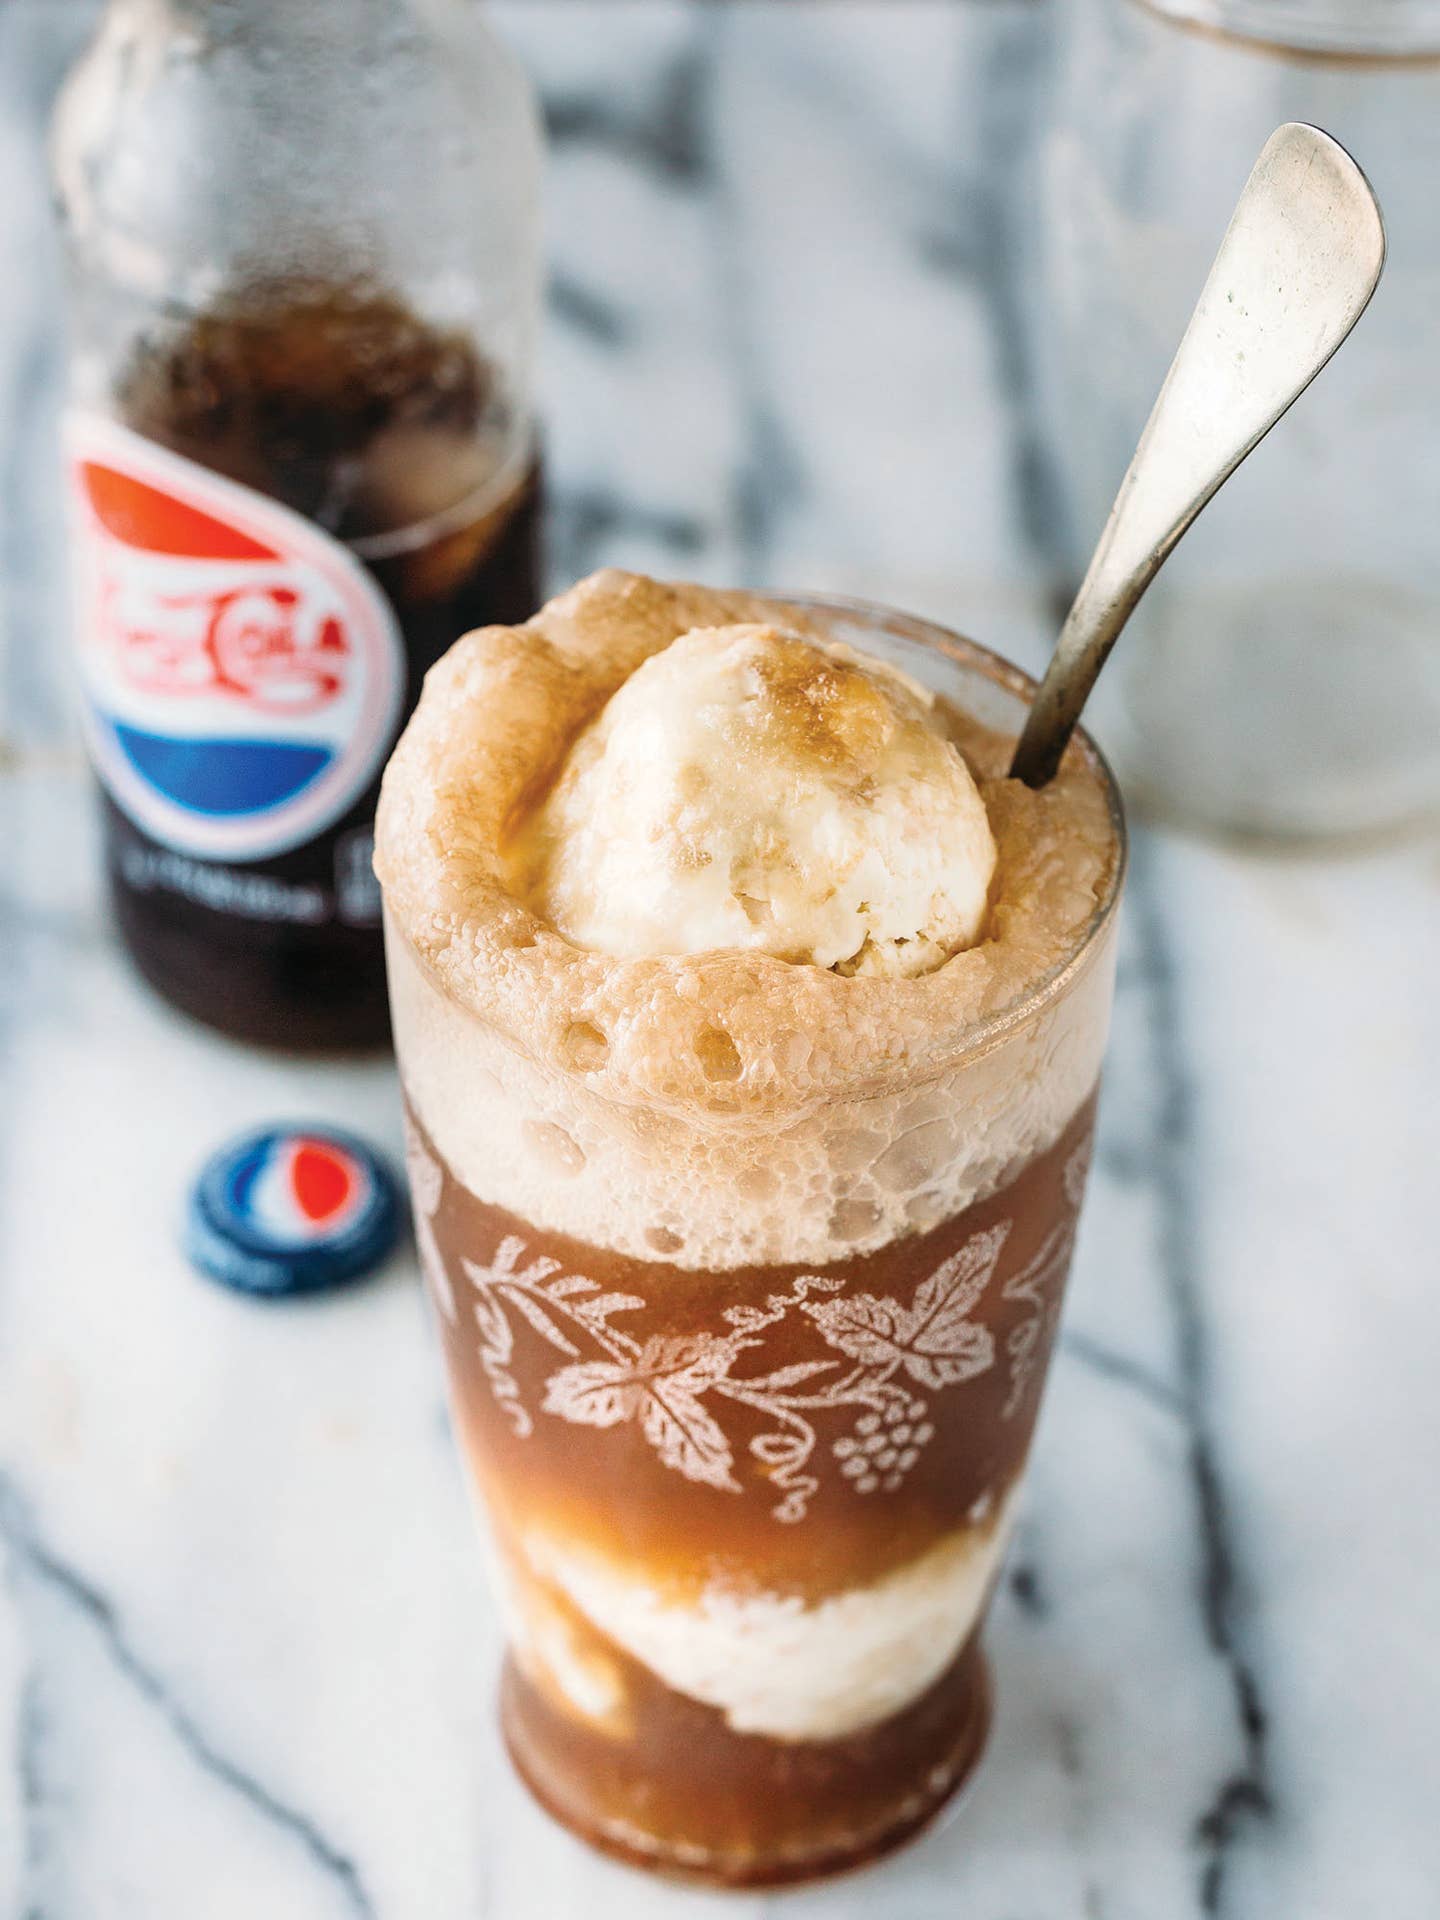 Have You Ever Tried Cola With Peanuts?